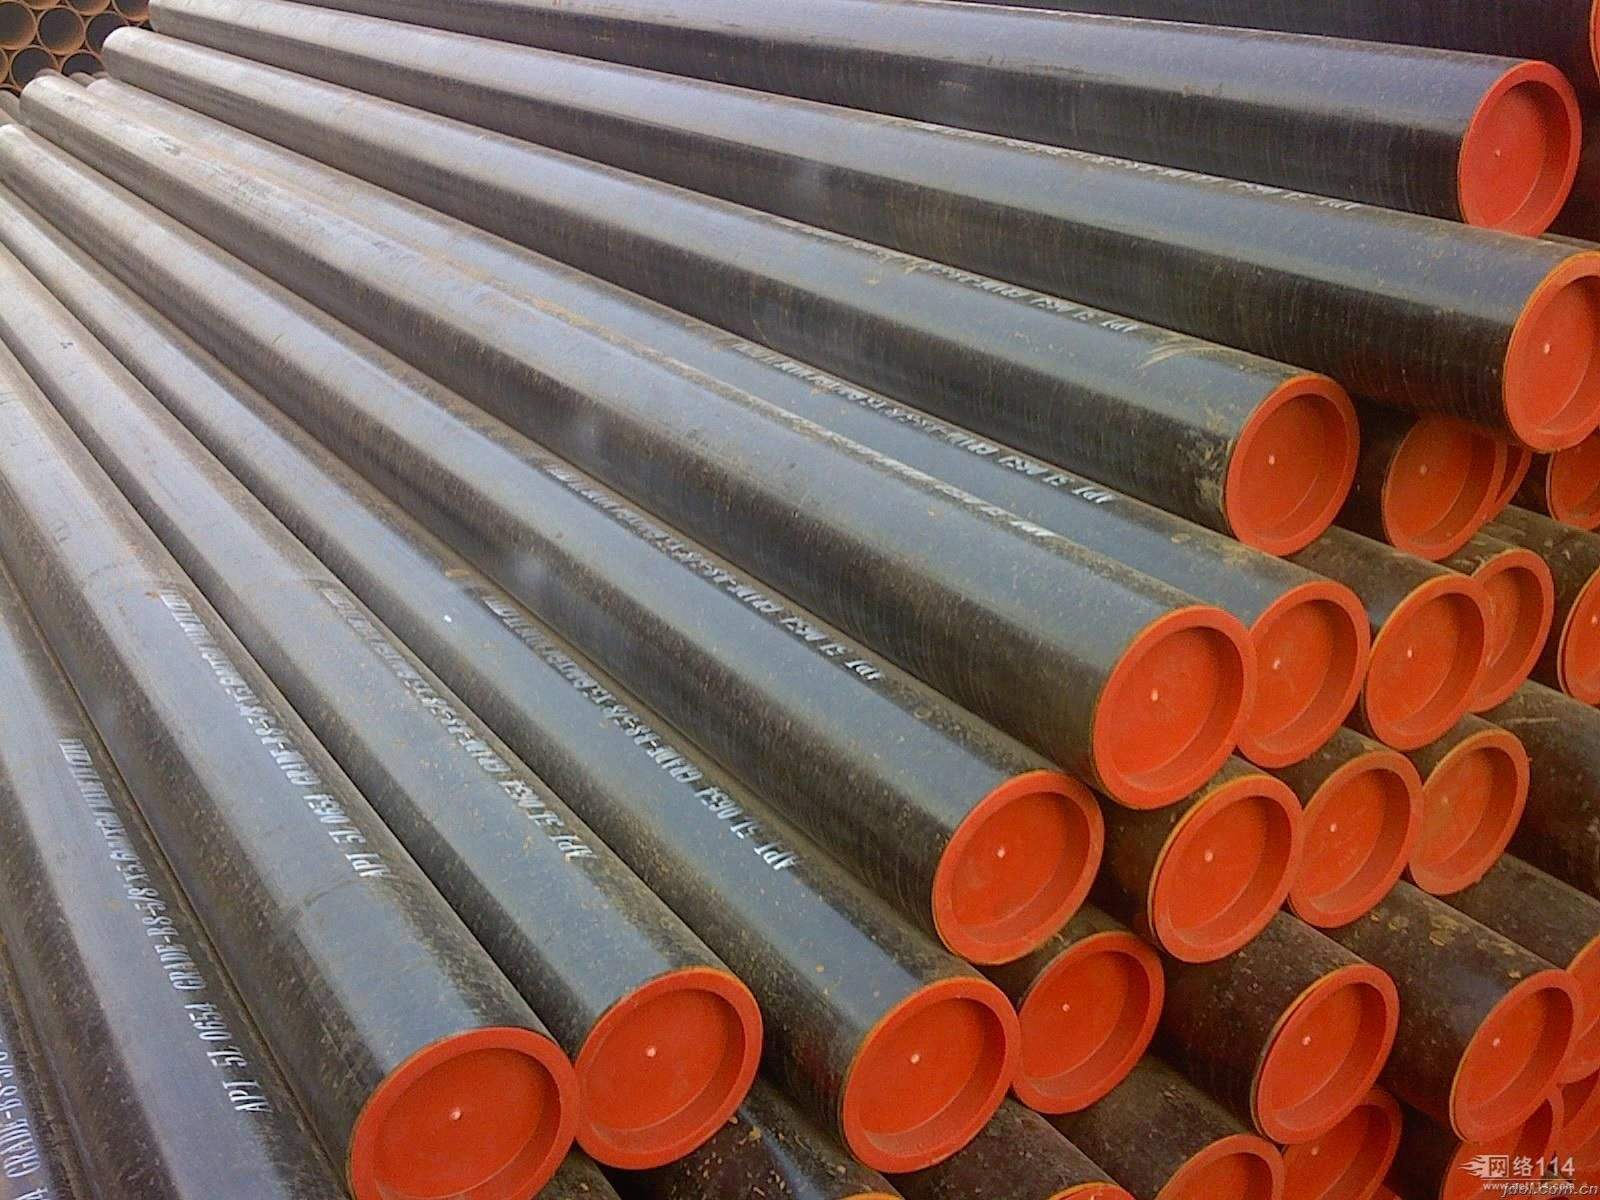 Astm A53 Grb Seamless Steel Pipecarbon Seamless Steel Pipe 7997